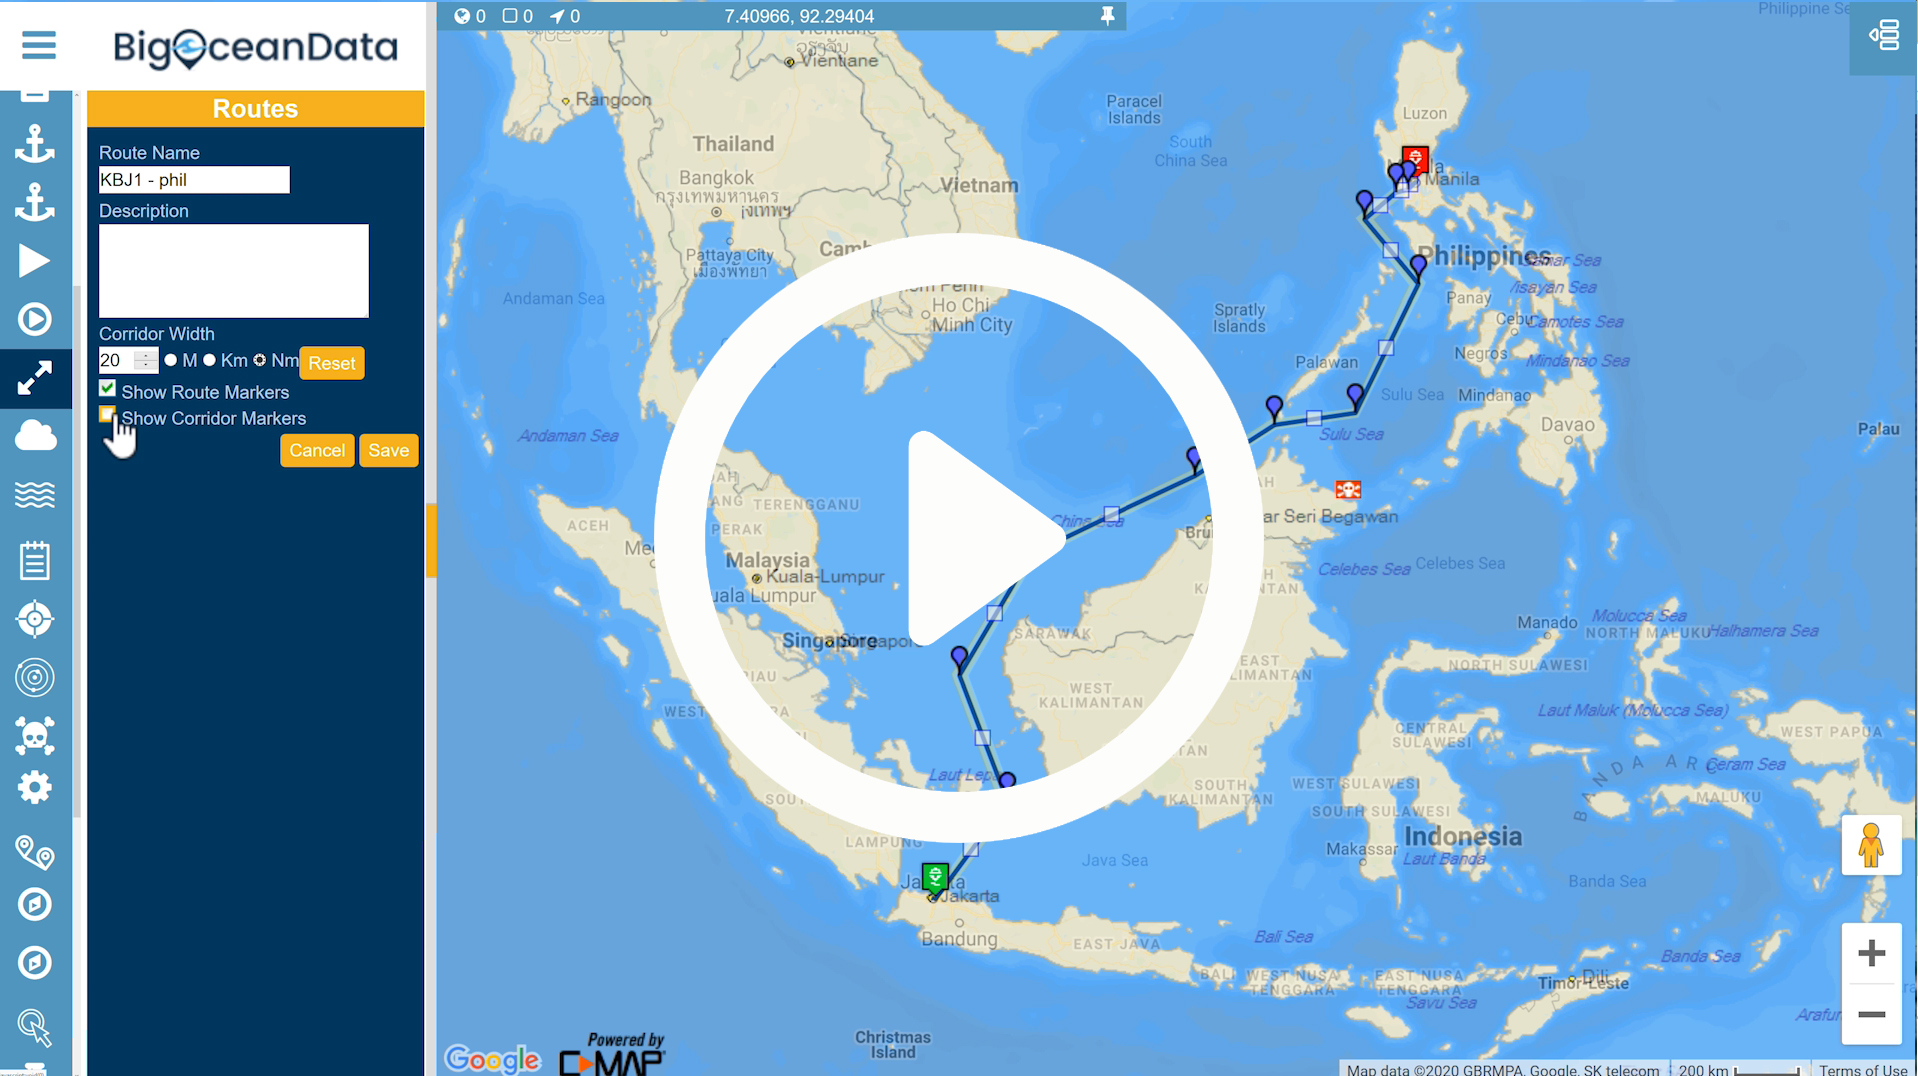 Piracy & Route Risk Management for shipping vessels